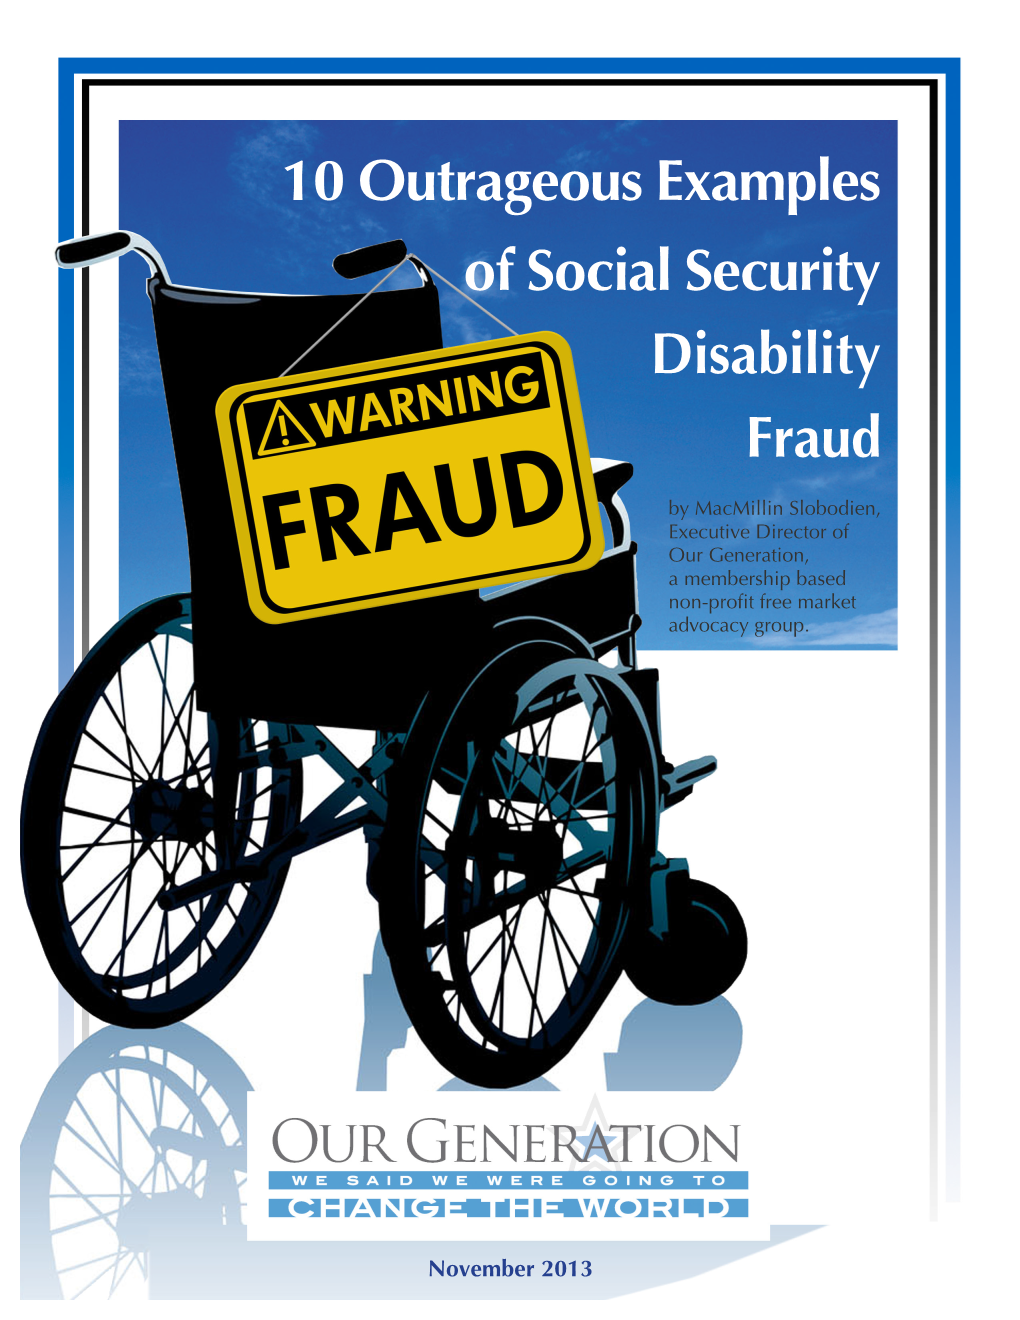 10 Outrageous Examples of Social Security Disability Fraud